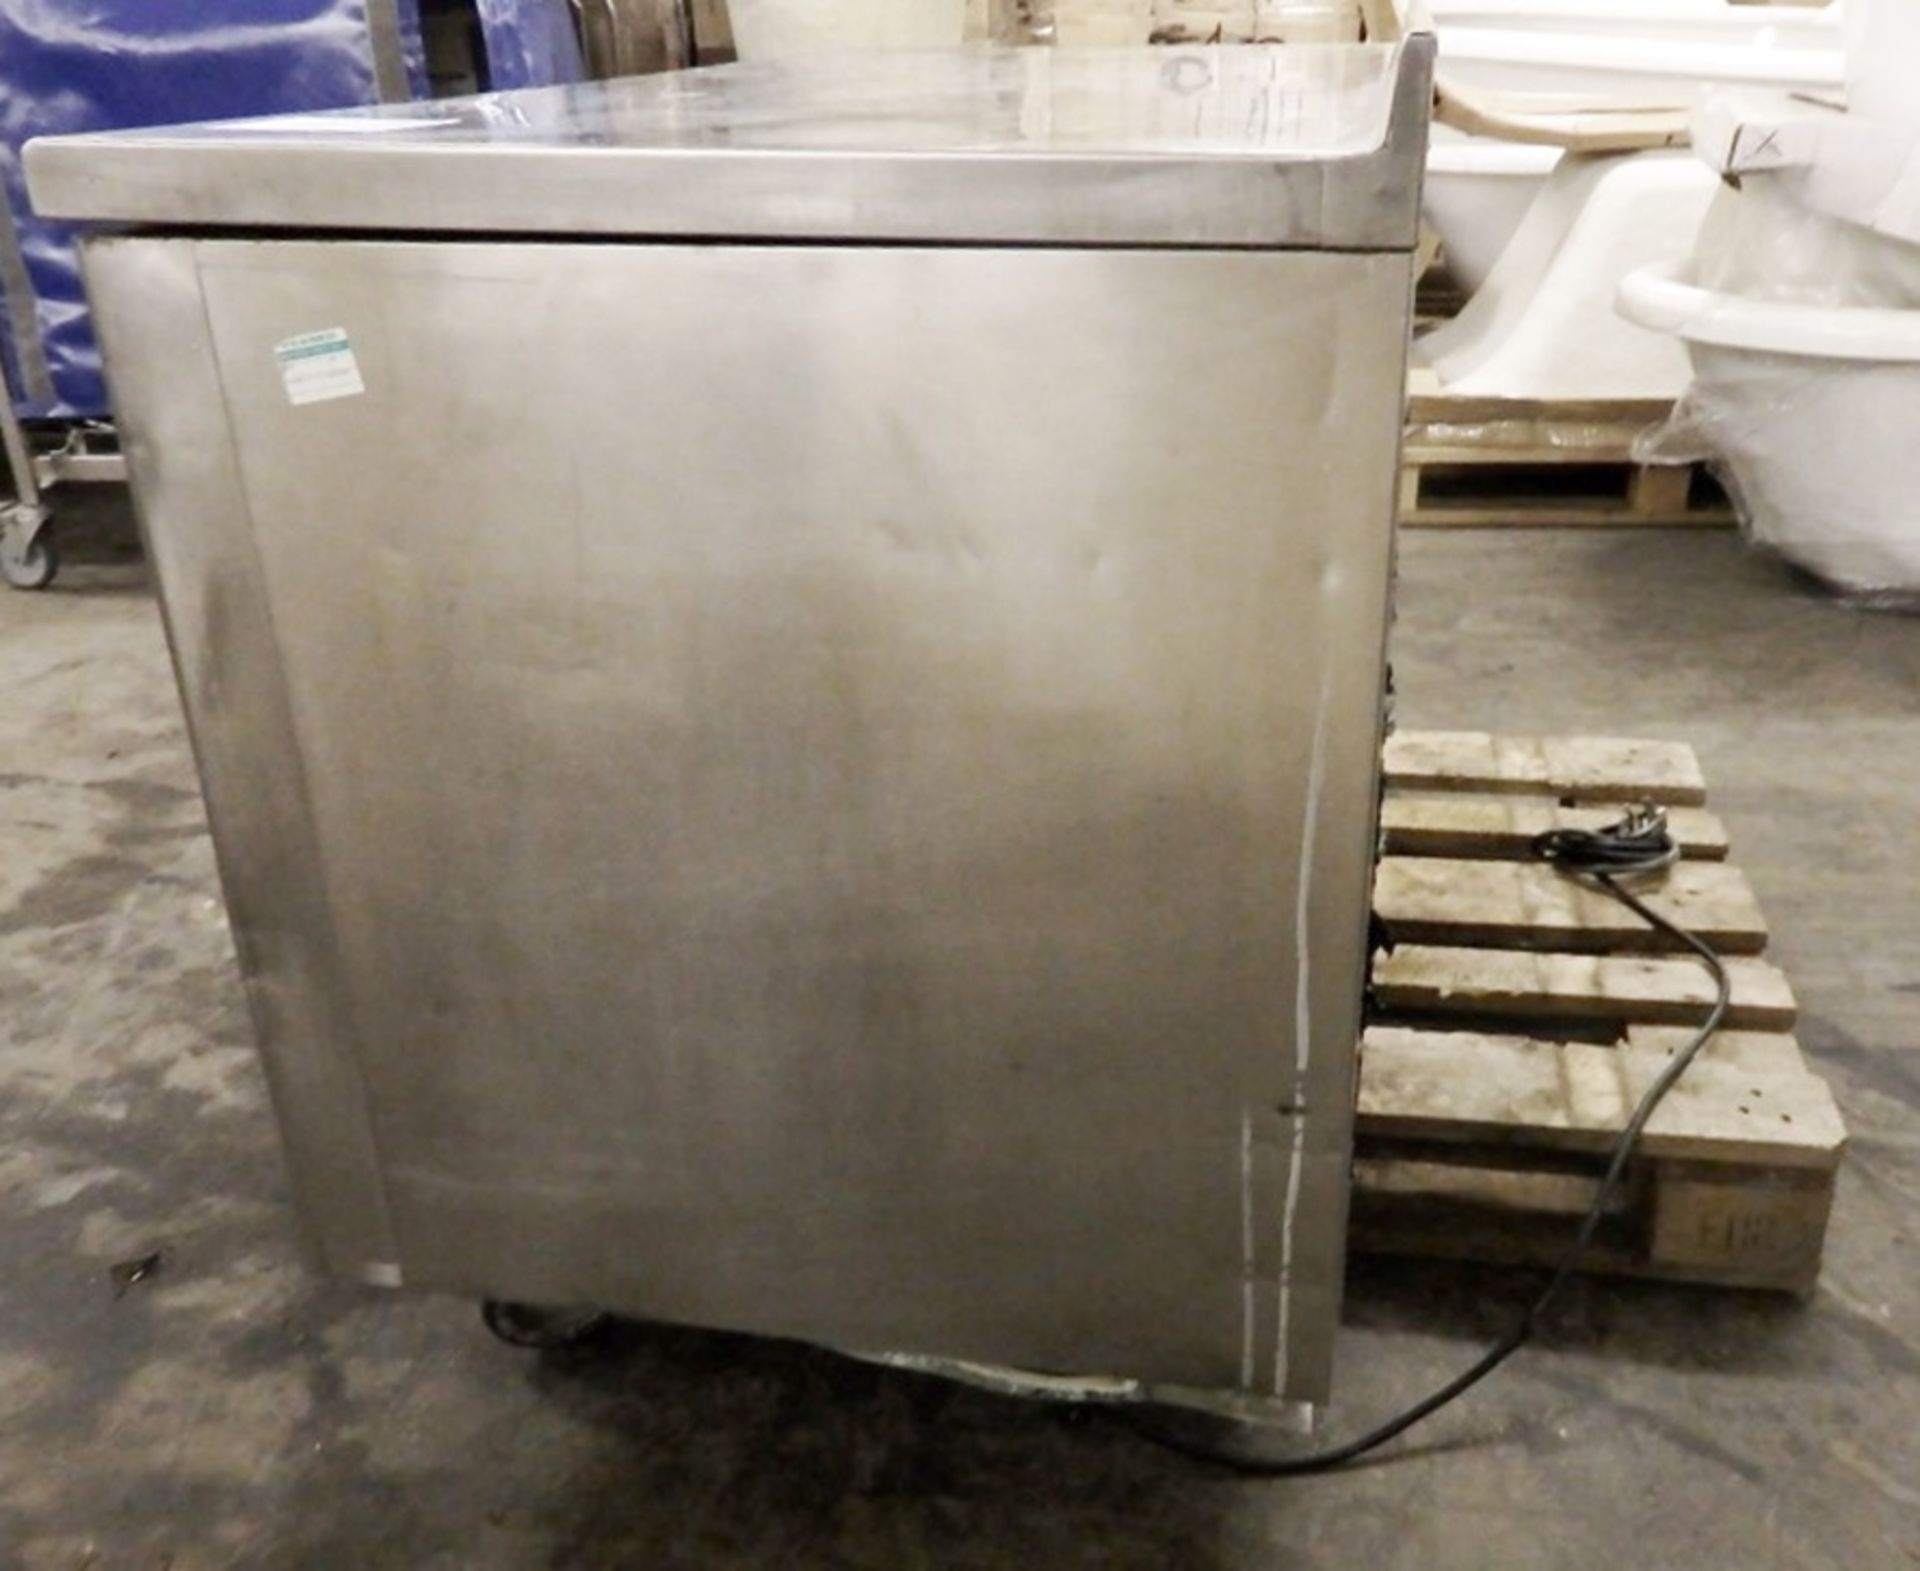 1 x "Delfield Sadia" Commercial Undercounter Refrigerator With 2-Door Storage And Stainless Steel - Image 4 of 11